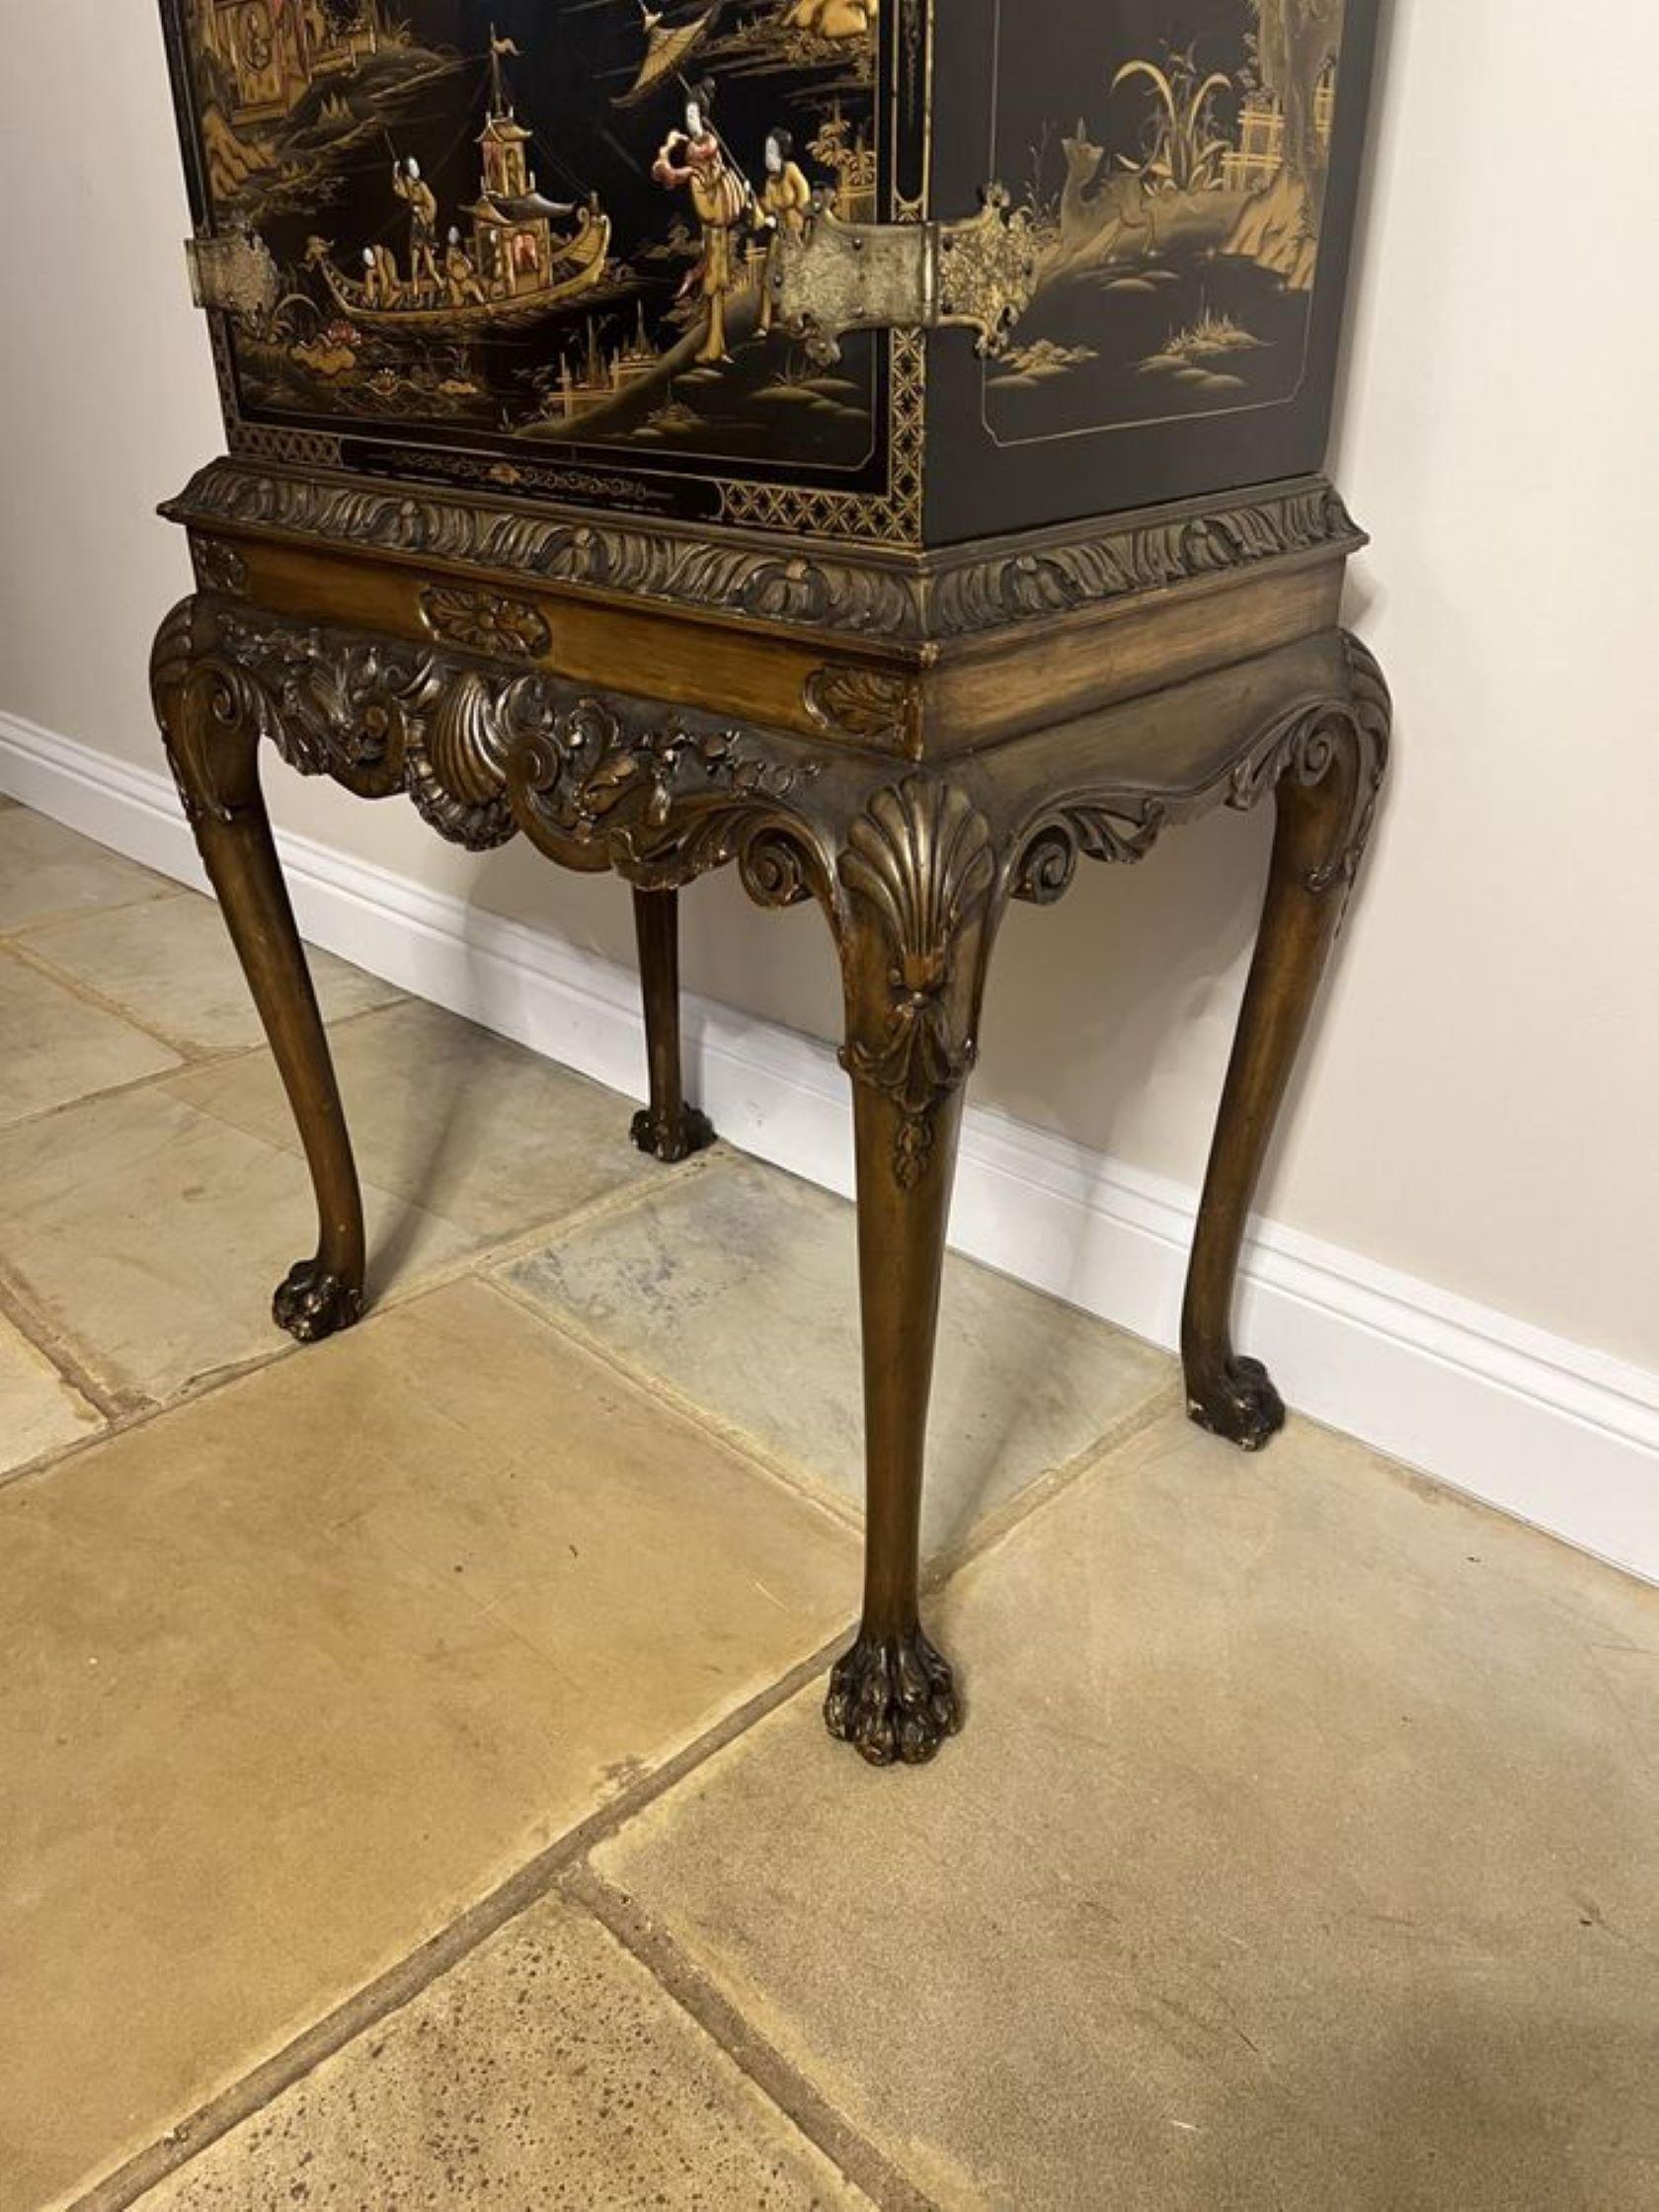 Outstanding quality antique Edwardian chinoiserie decorated cabinet on a stand 1